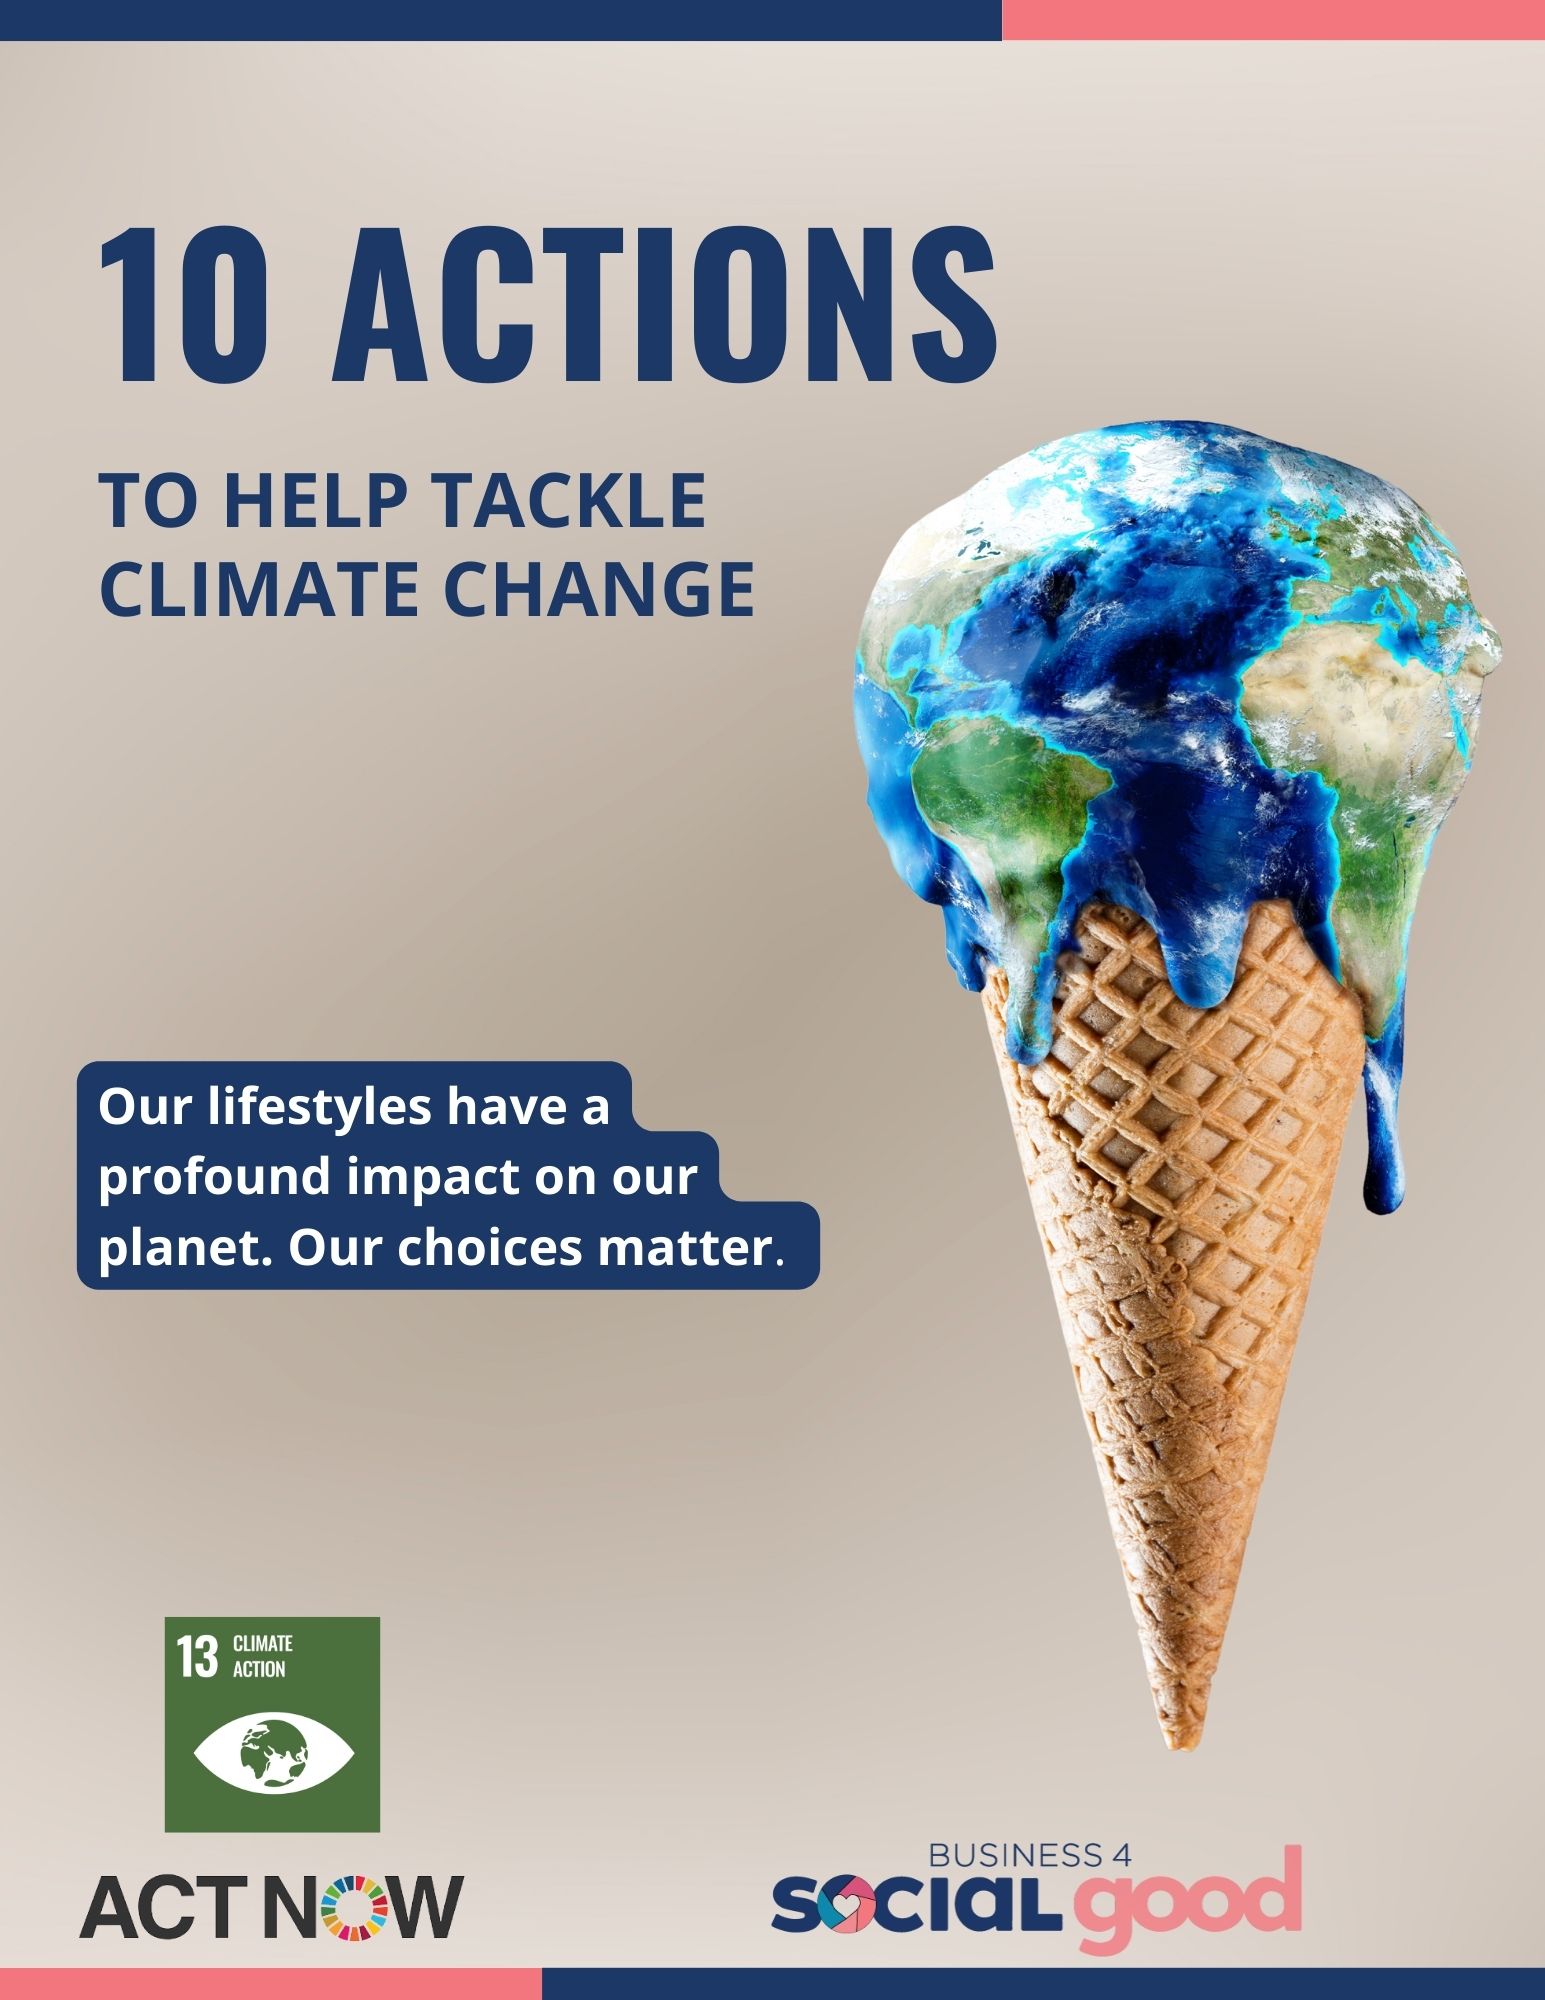 10 Actions to help tackle climate change